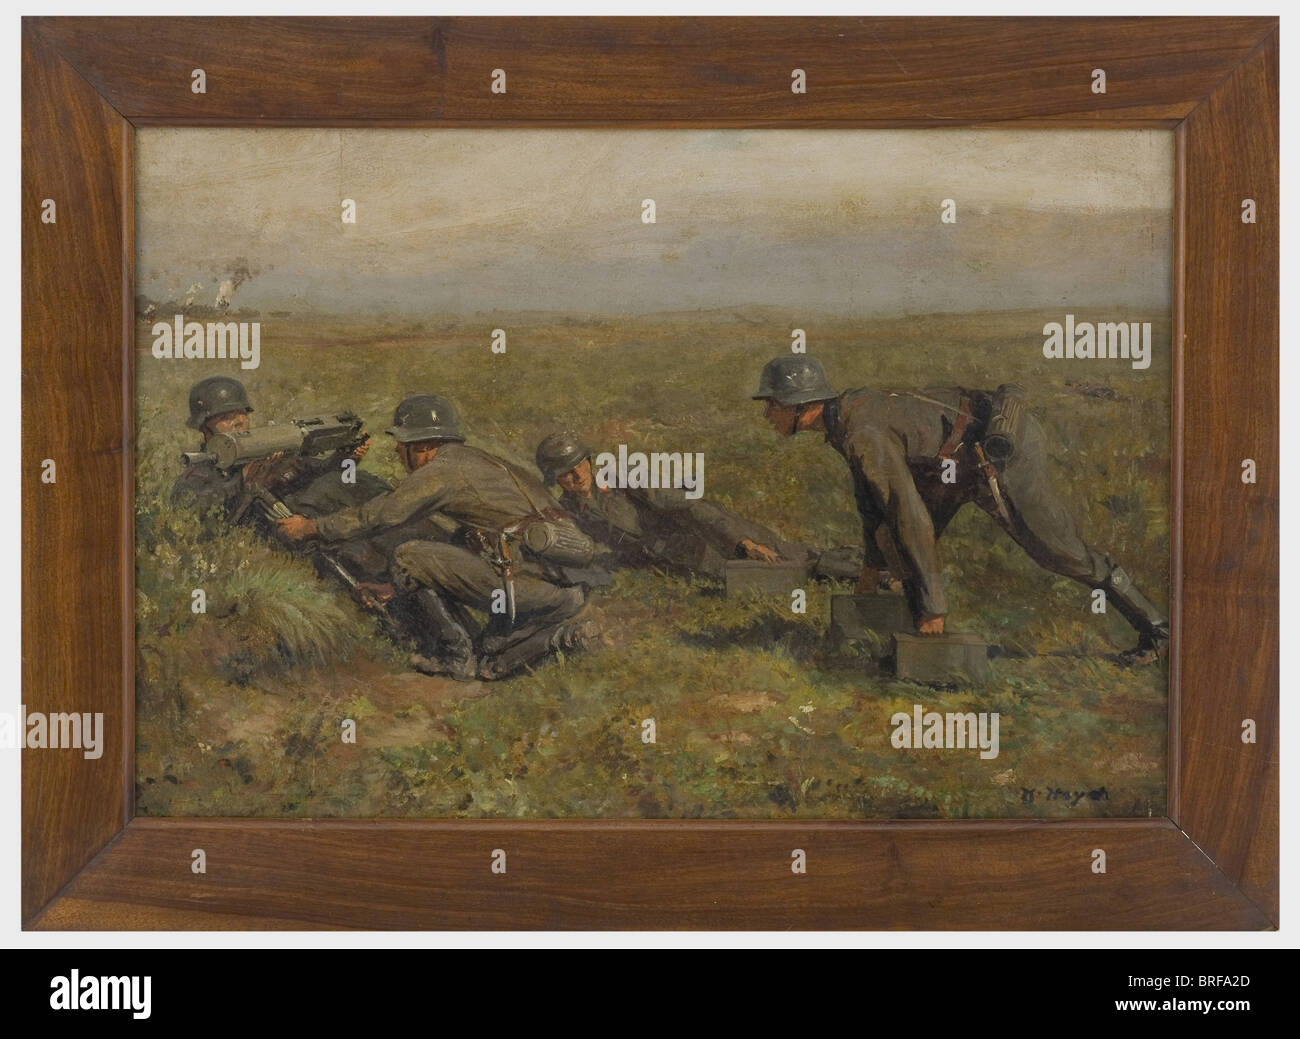 Karl Hayd (1882 - 1945) - 'hMG group taking position'., Oil on wood, four German Airforce soldiers bringing a MG 08 into position. Signed on lower right 'K. Hayd'. Picture size 64 x 93 cm, with brown wood frame 80 x 110 cm. Karl Hayd, painter and illustrator from Linz, studied under Griepenkerl, Delug and Unger at the Academy of Fine Arts in Vienna, and under Thiele in Prague. Four of his works are exhibited in the Albertina, Vienna. historic, historical, people, 1930s, 20th century, fine arts, art, NS, National Socialism, Nazism, Third Reich, German Reich, Ger, Stock Photo